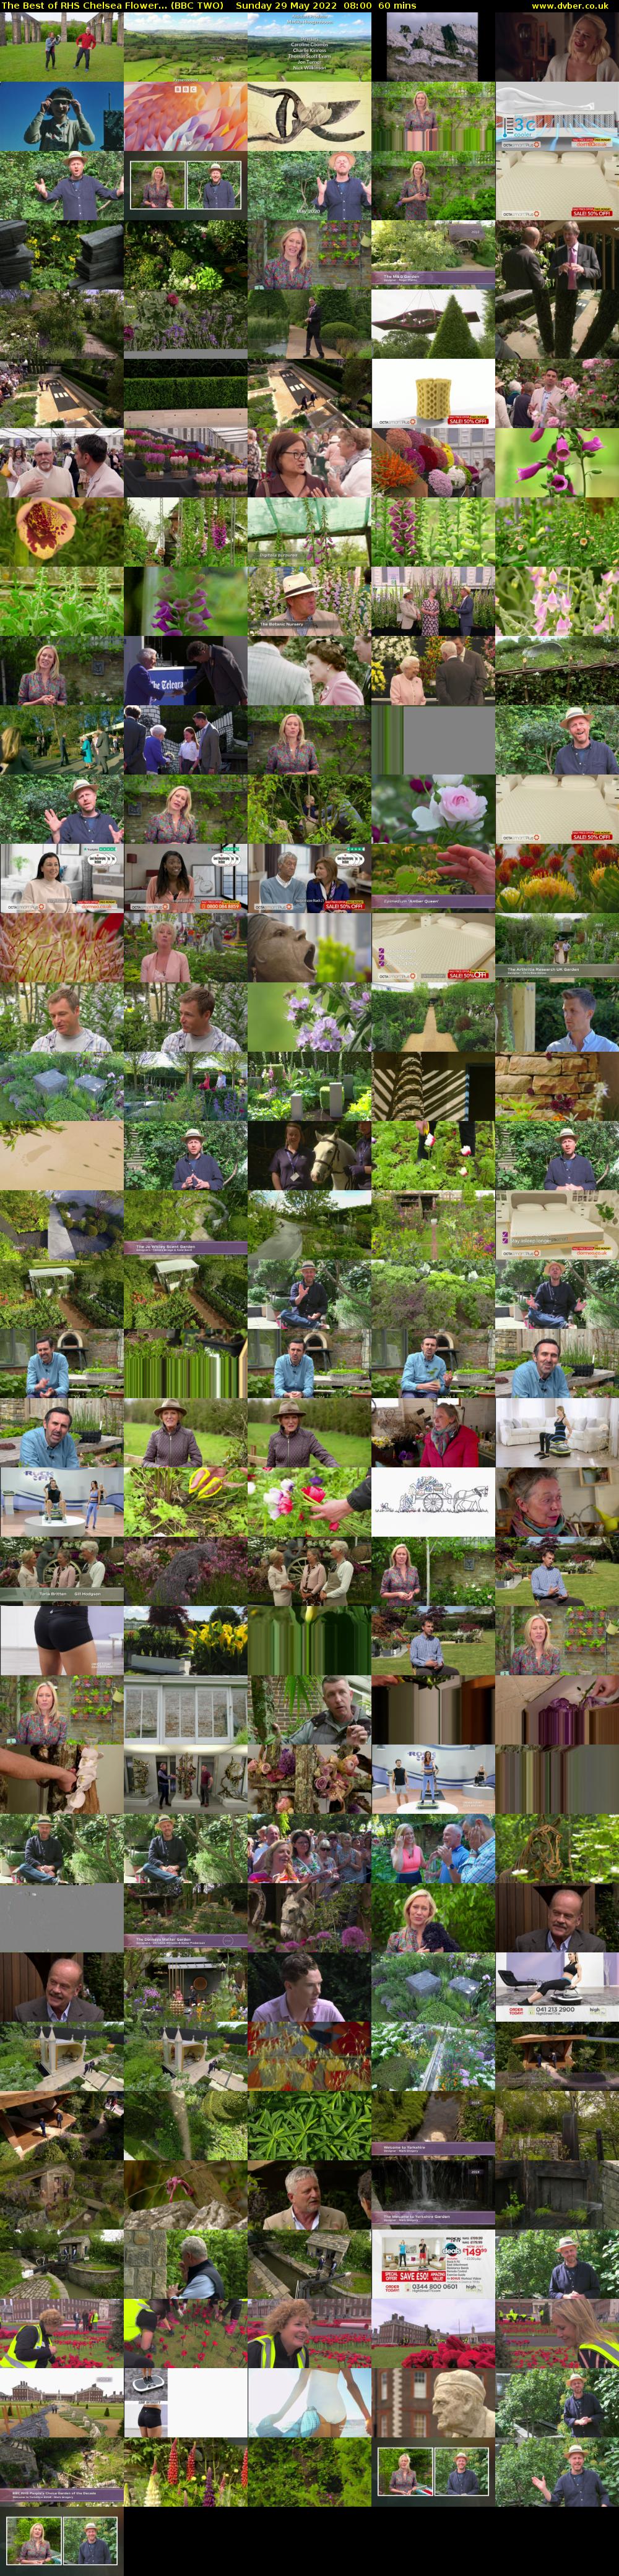 The Best of RHS Chelsea Flower... (BBC TWO) Sunday 29 May 2022 08:00 - 09:00